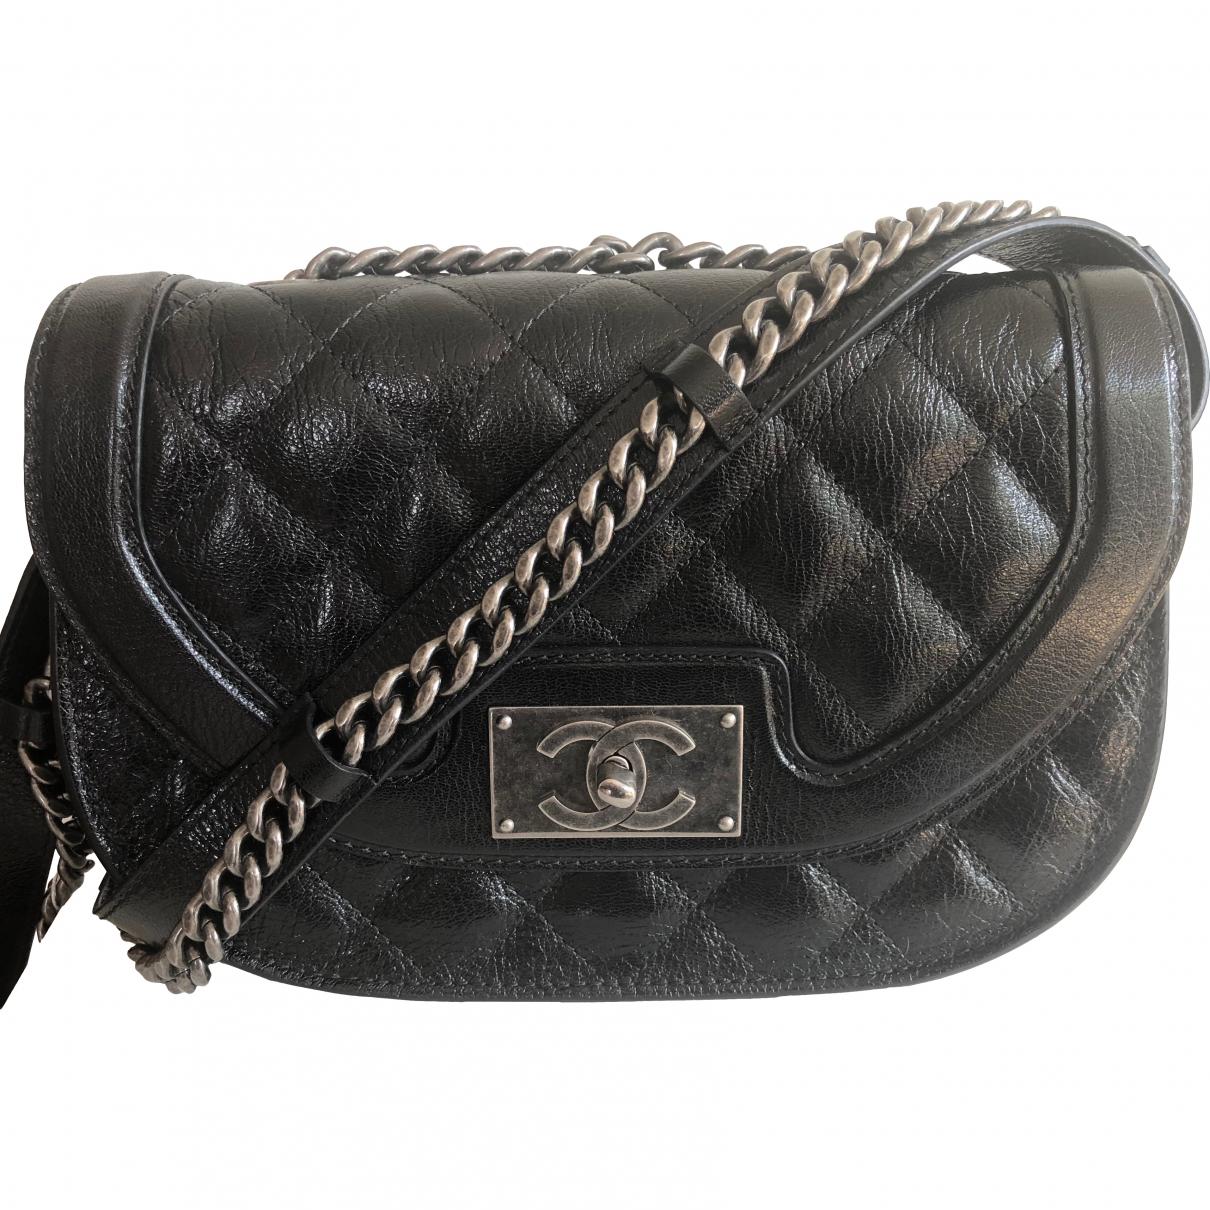 Chanel Patent Leather Crossbody Bag in Black for Men - Lyst